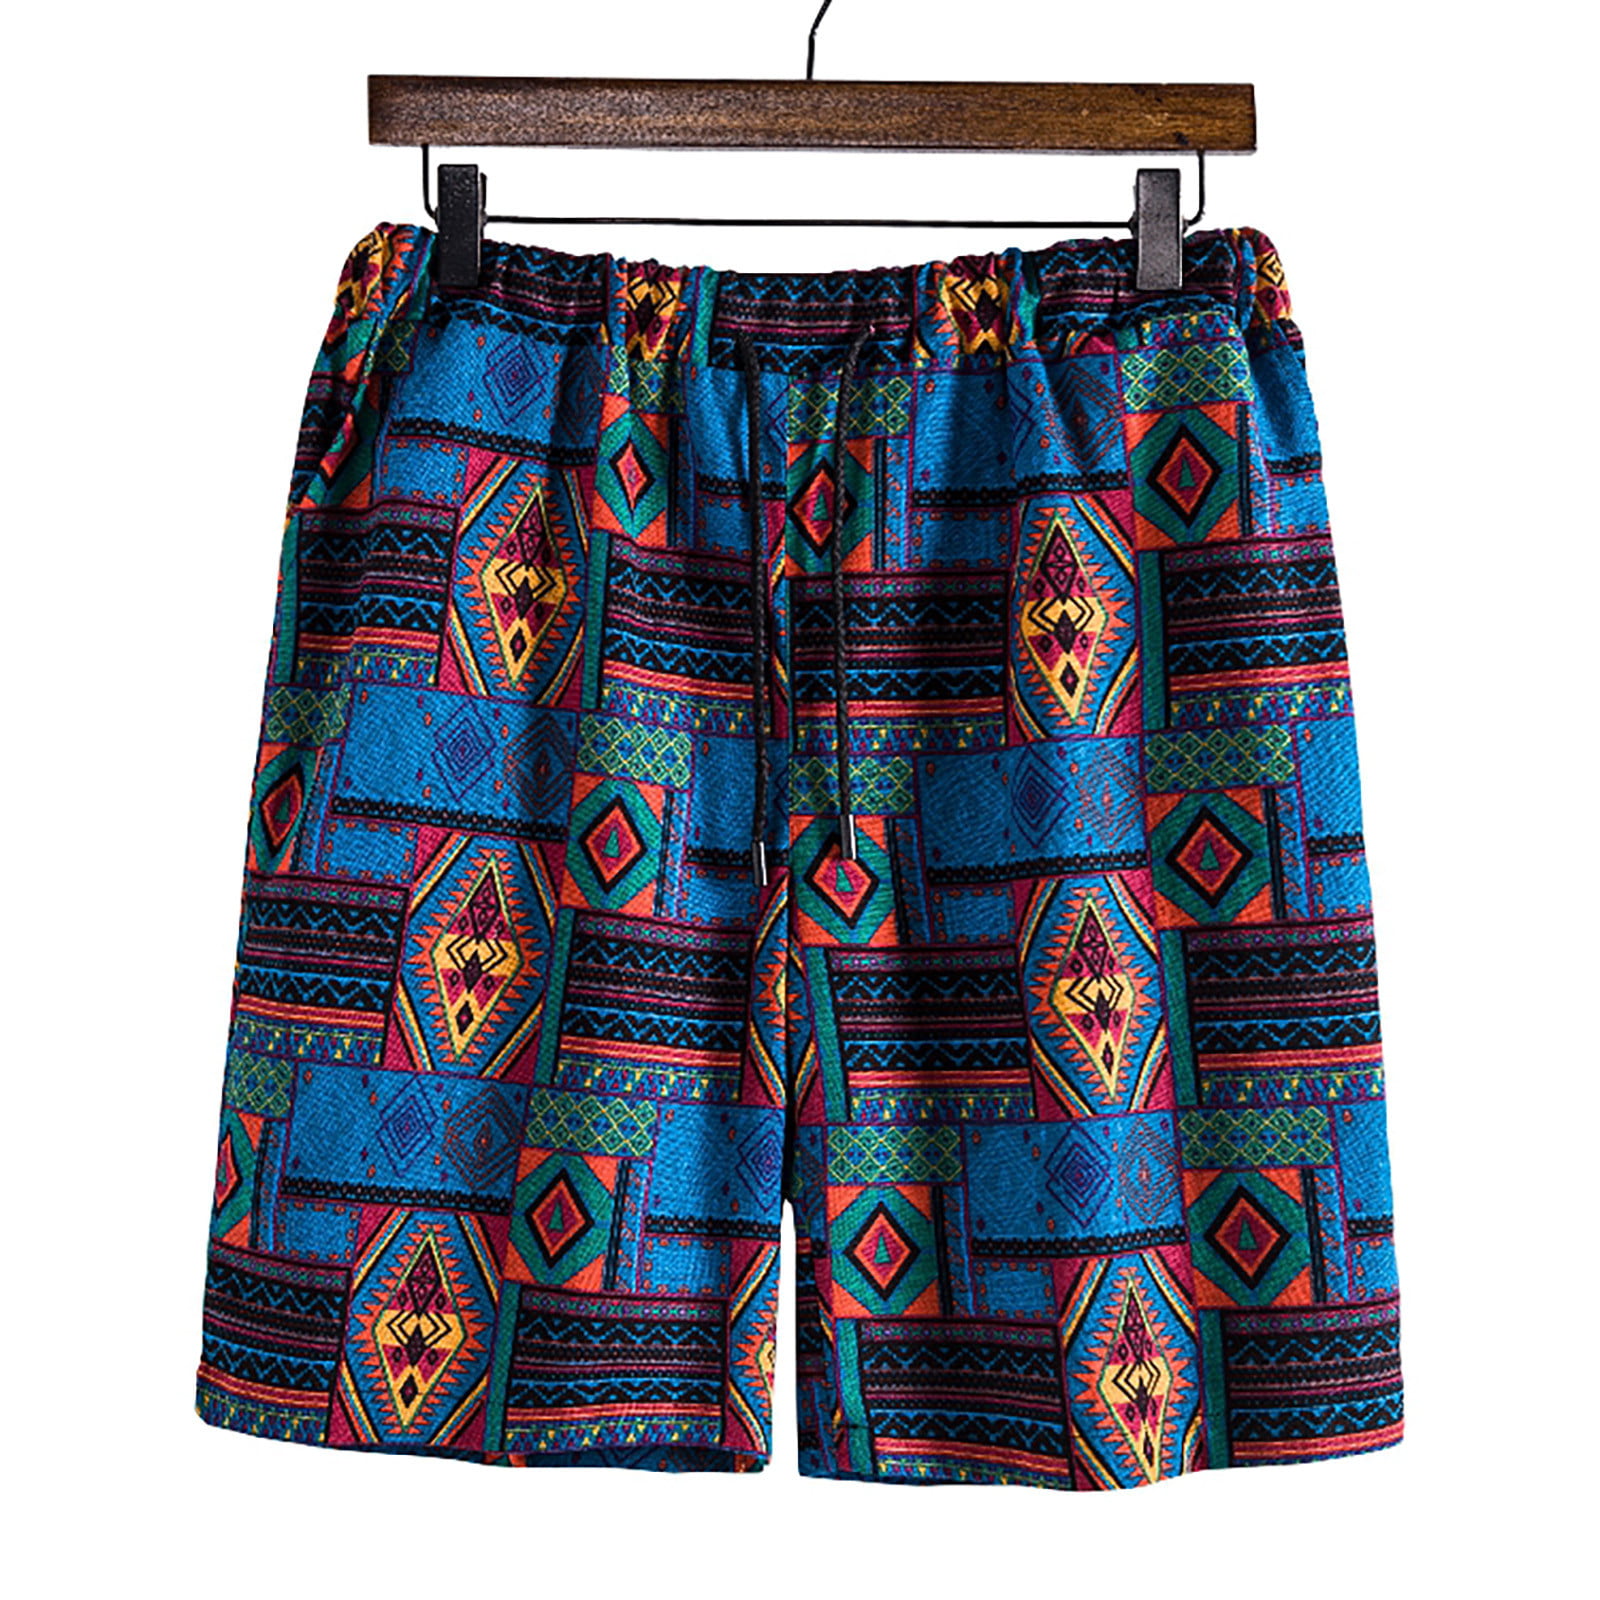 Fashion Short Trousers Tally Weijl Beach Shorts blue graphic pattern casual look 